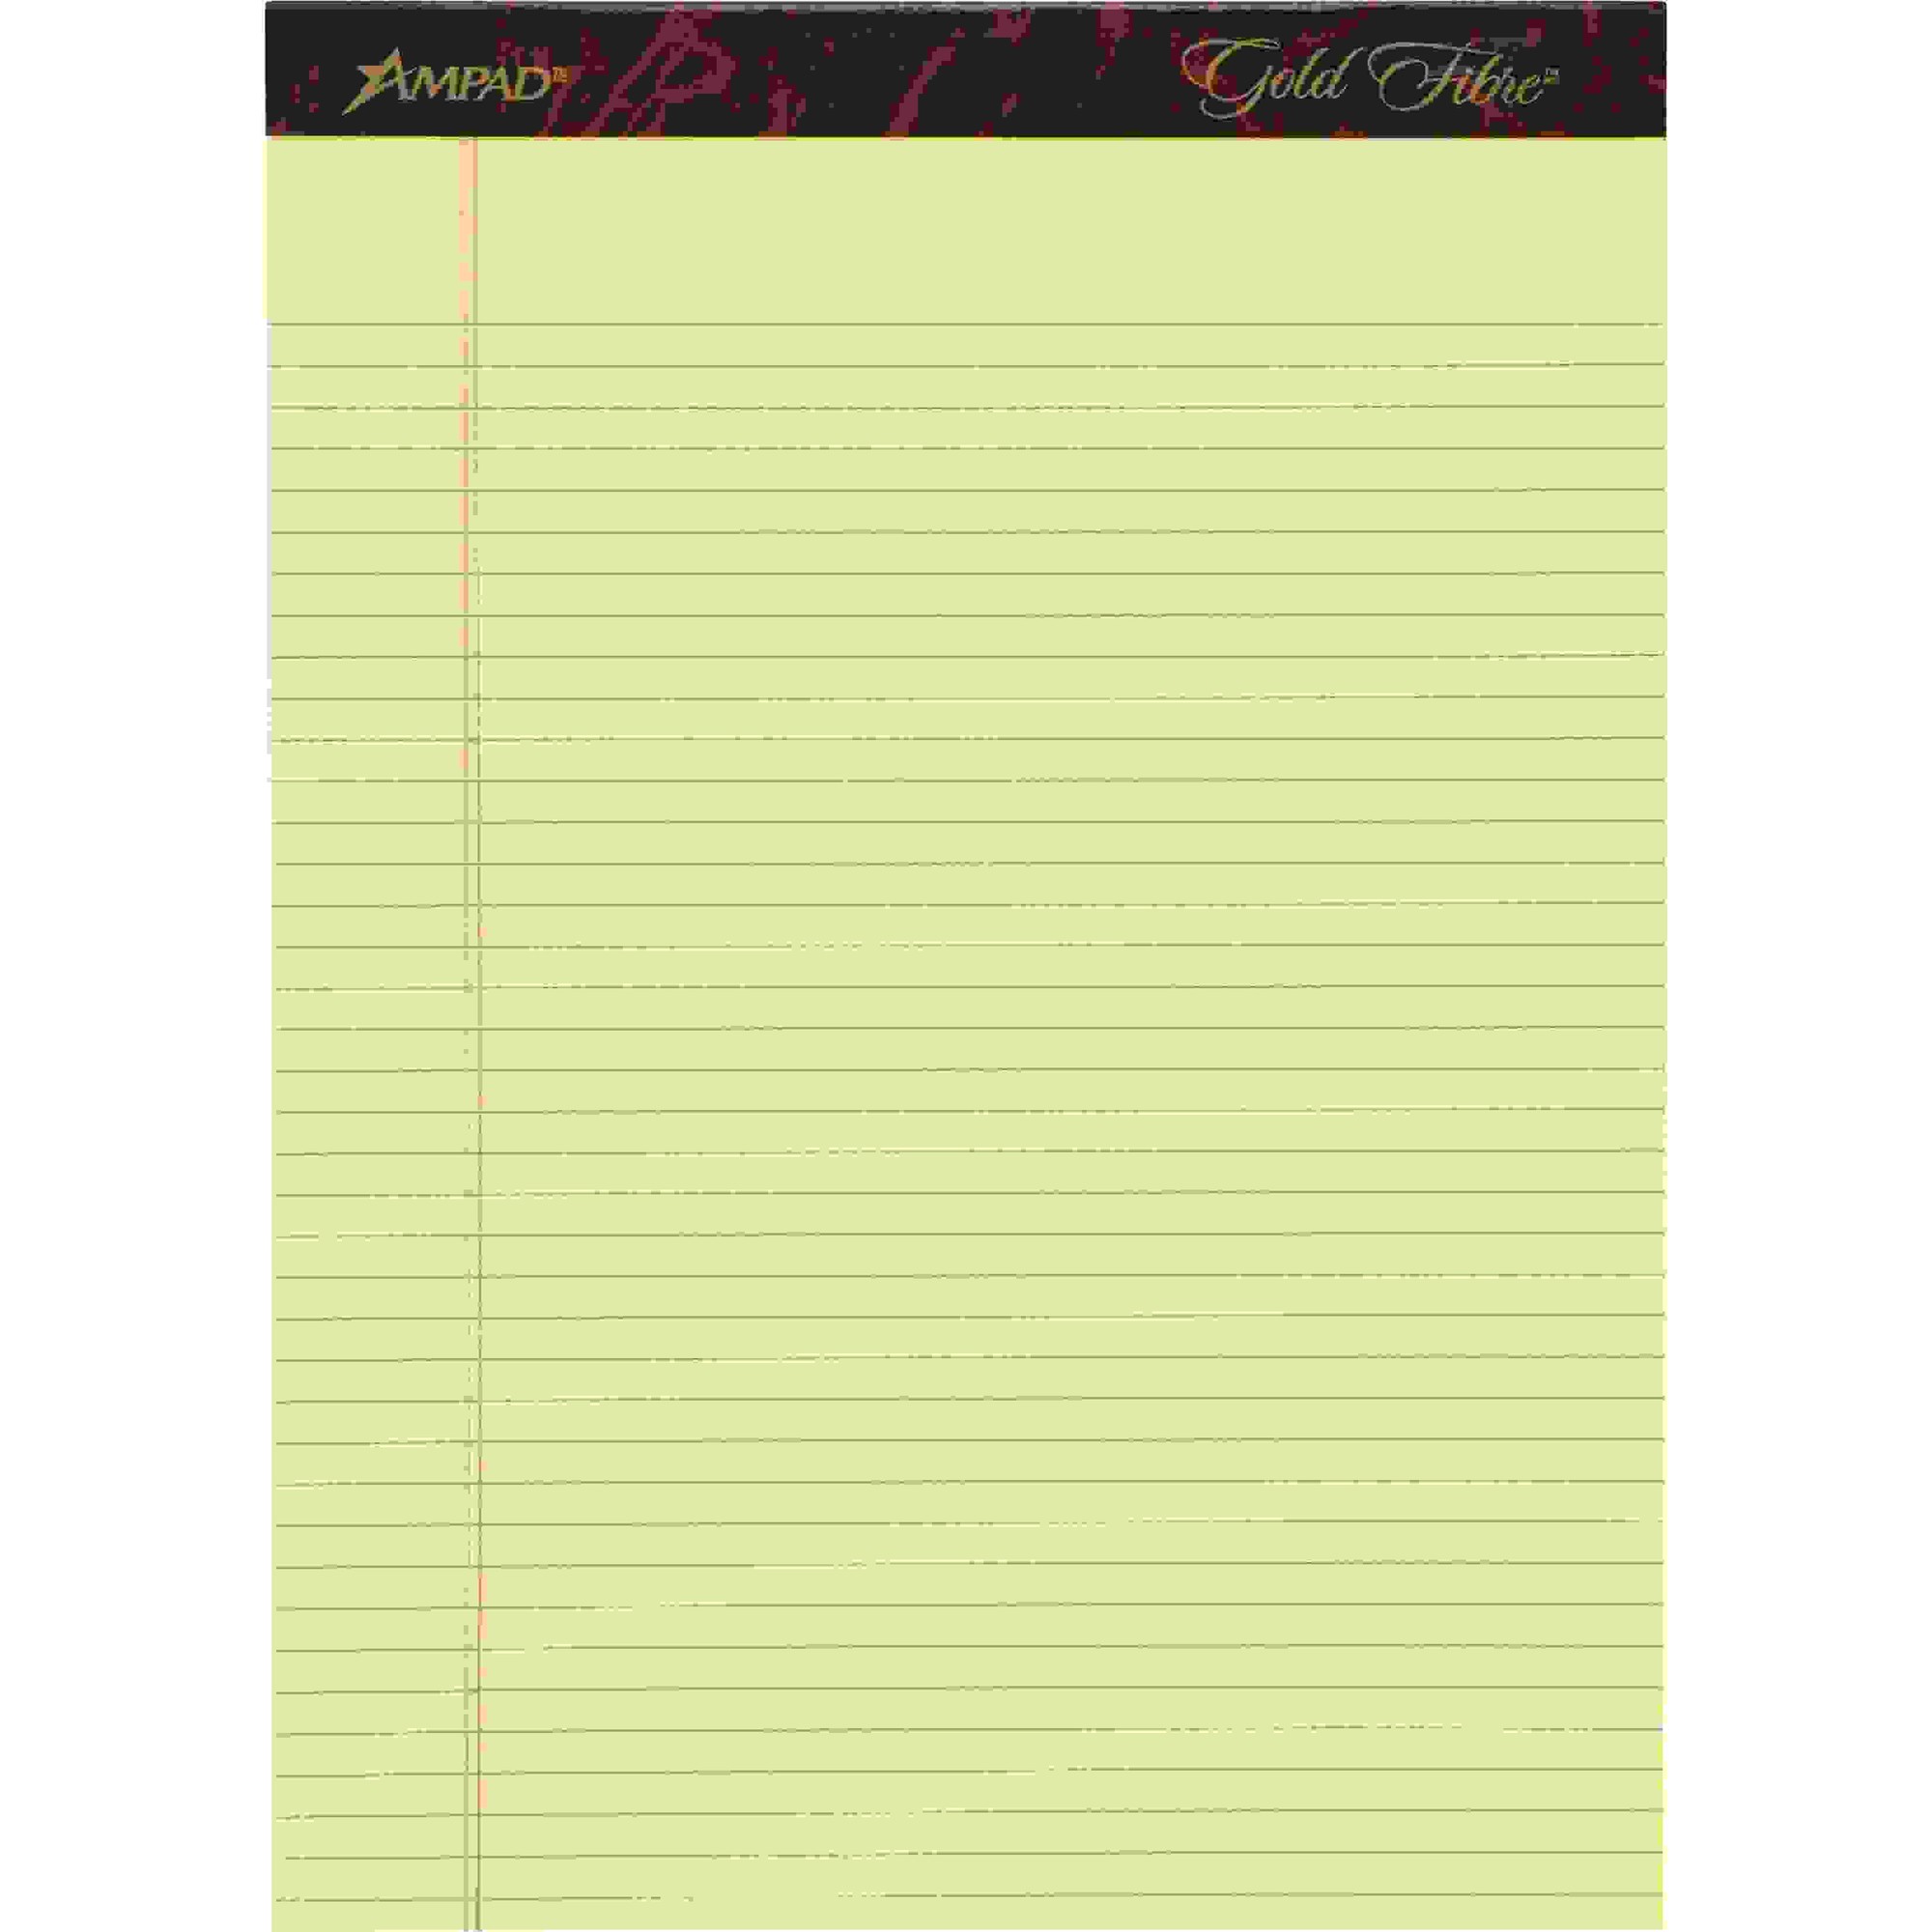 Ampad Ampad Gold Fibre Narrow Rule Writing Pads - 50 Sheets - Watermark - Stapled/Glued - 0.25" Ruled - 16 lb Basis Weight - Let